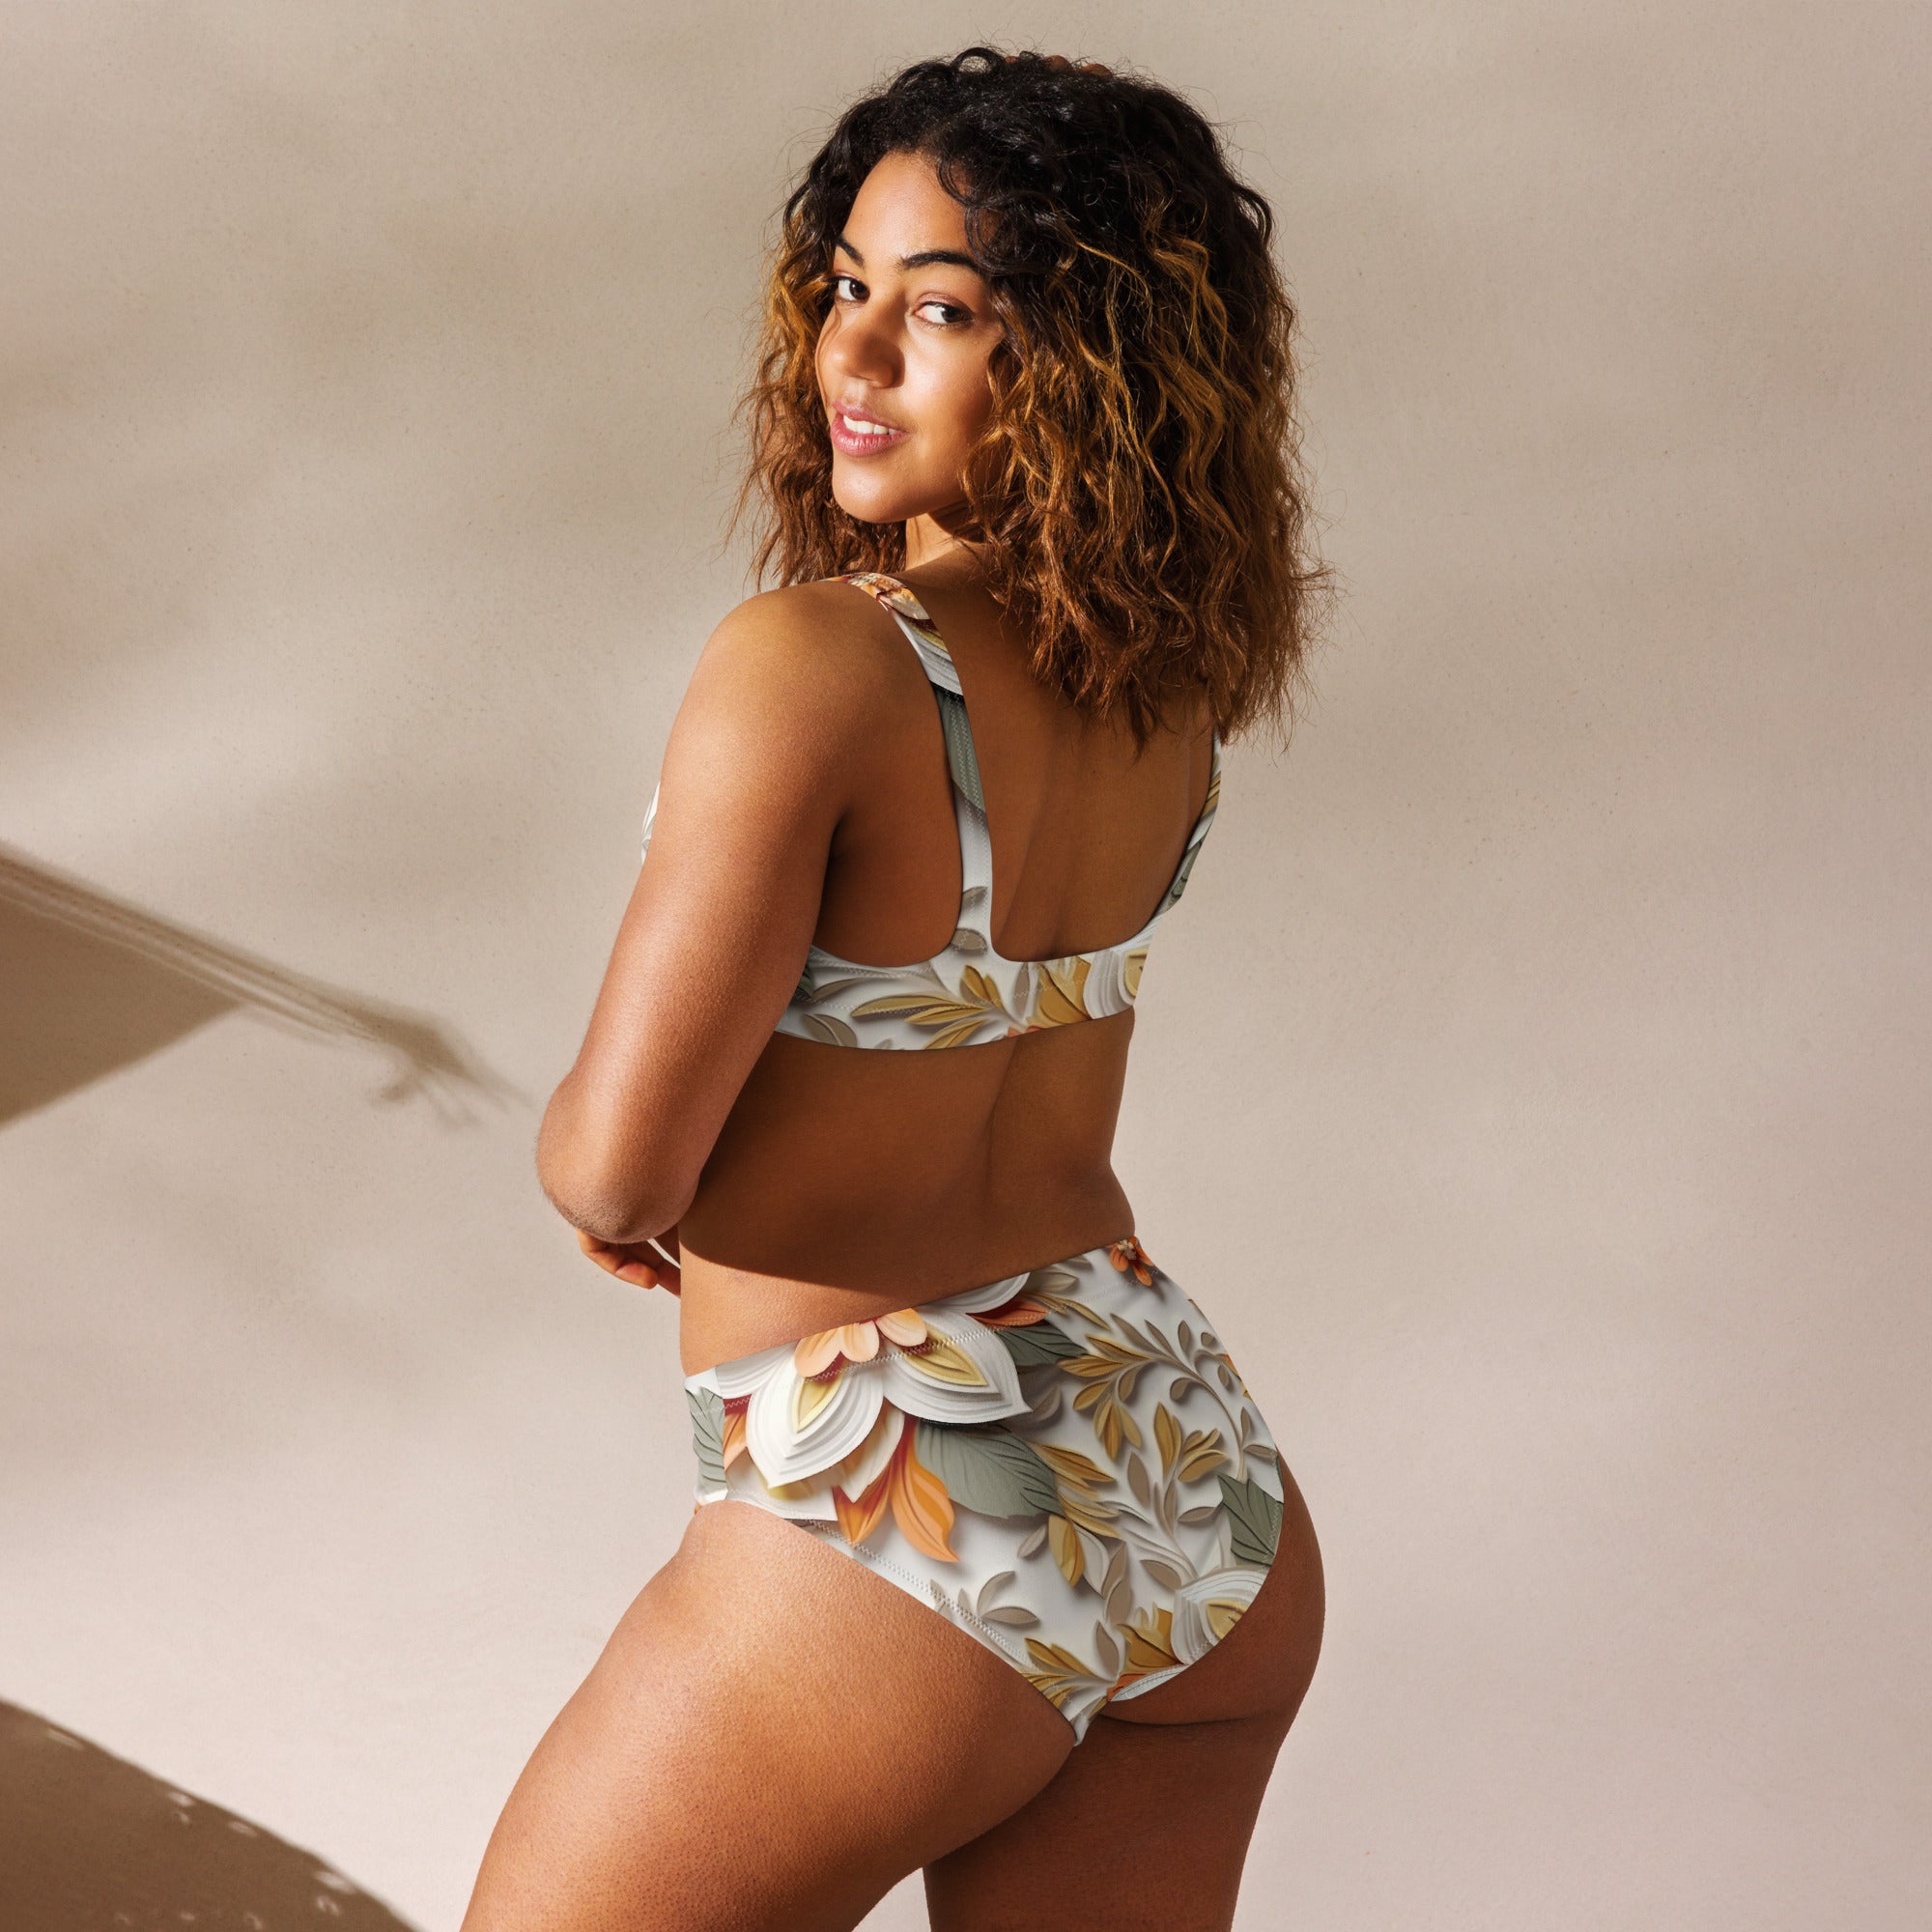 Elegant Recycled High-Waist Bikini - Revive Wear     Comfortable and figure-flattering high-waist bikinis for women in stylish plus sizes. Made of soft, recycled material with removable padding. Shop Bikinis Today